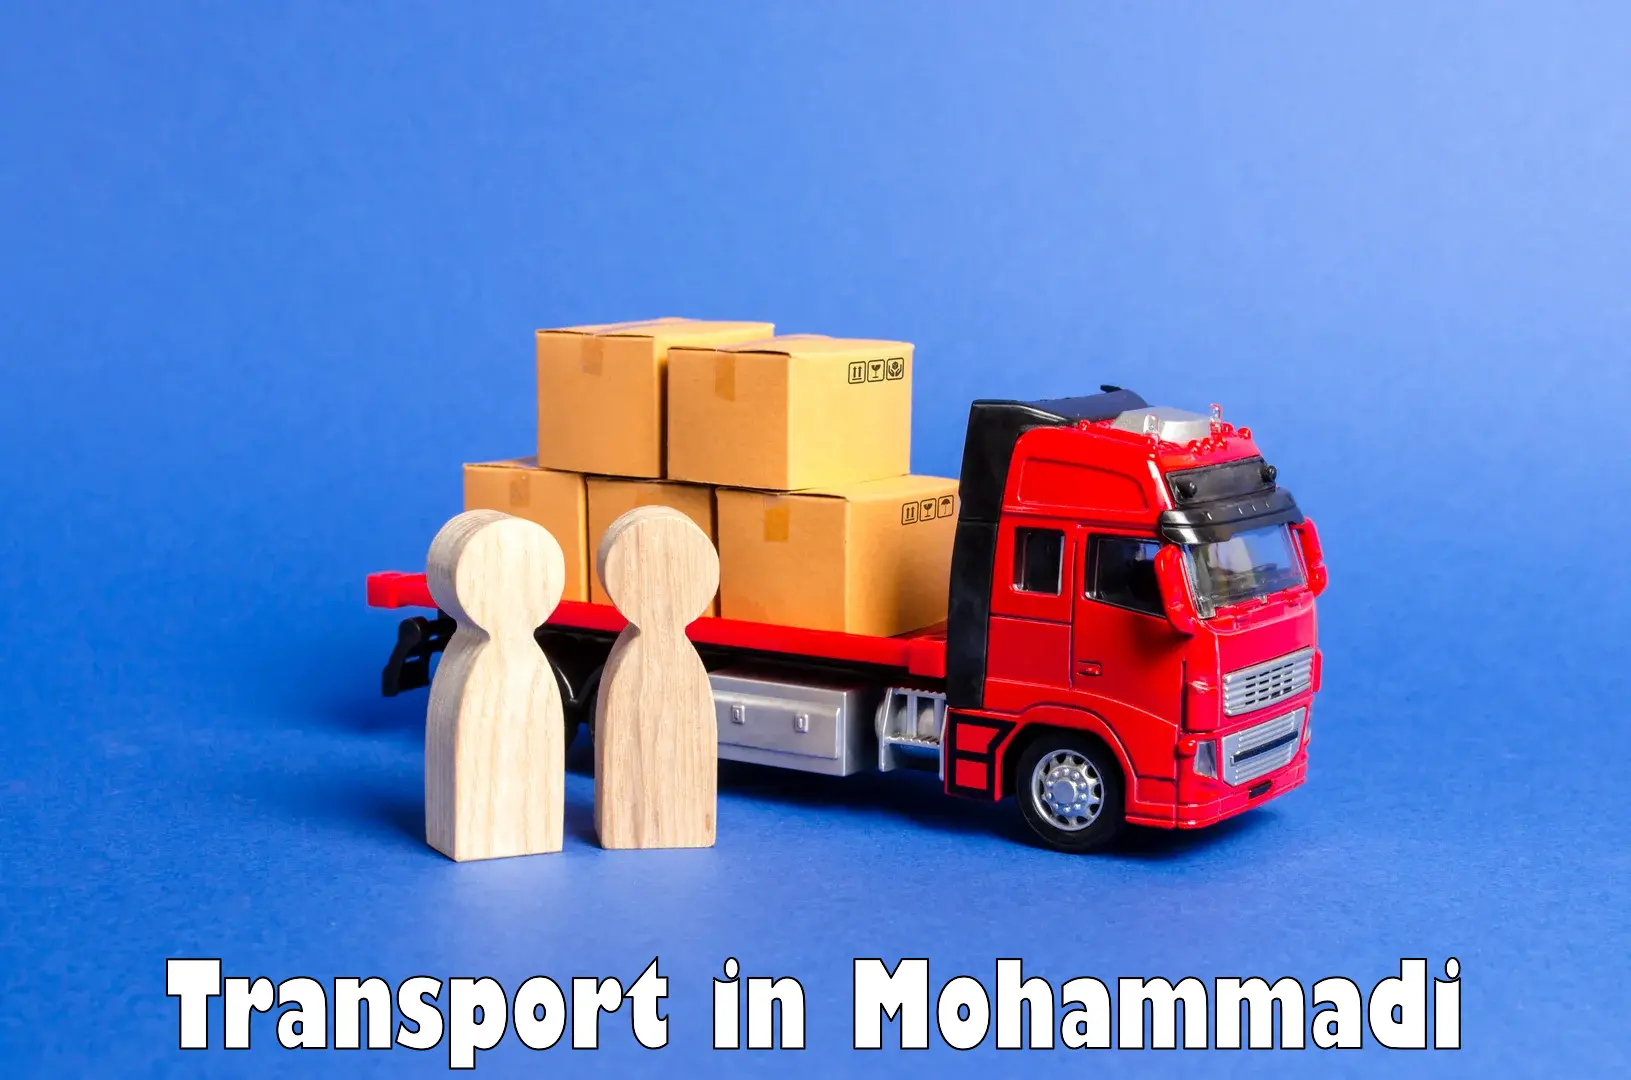 Daily parcel service transport in Mohammadi